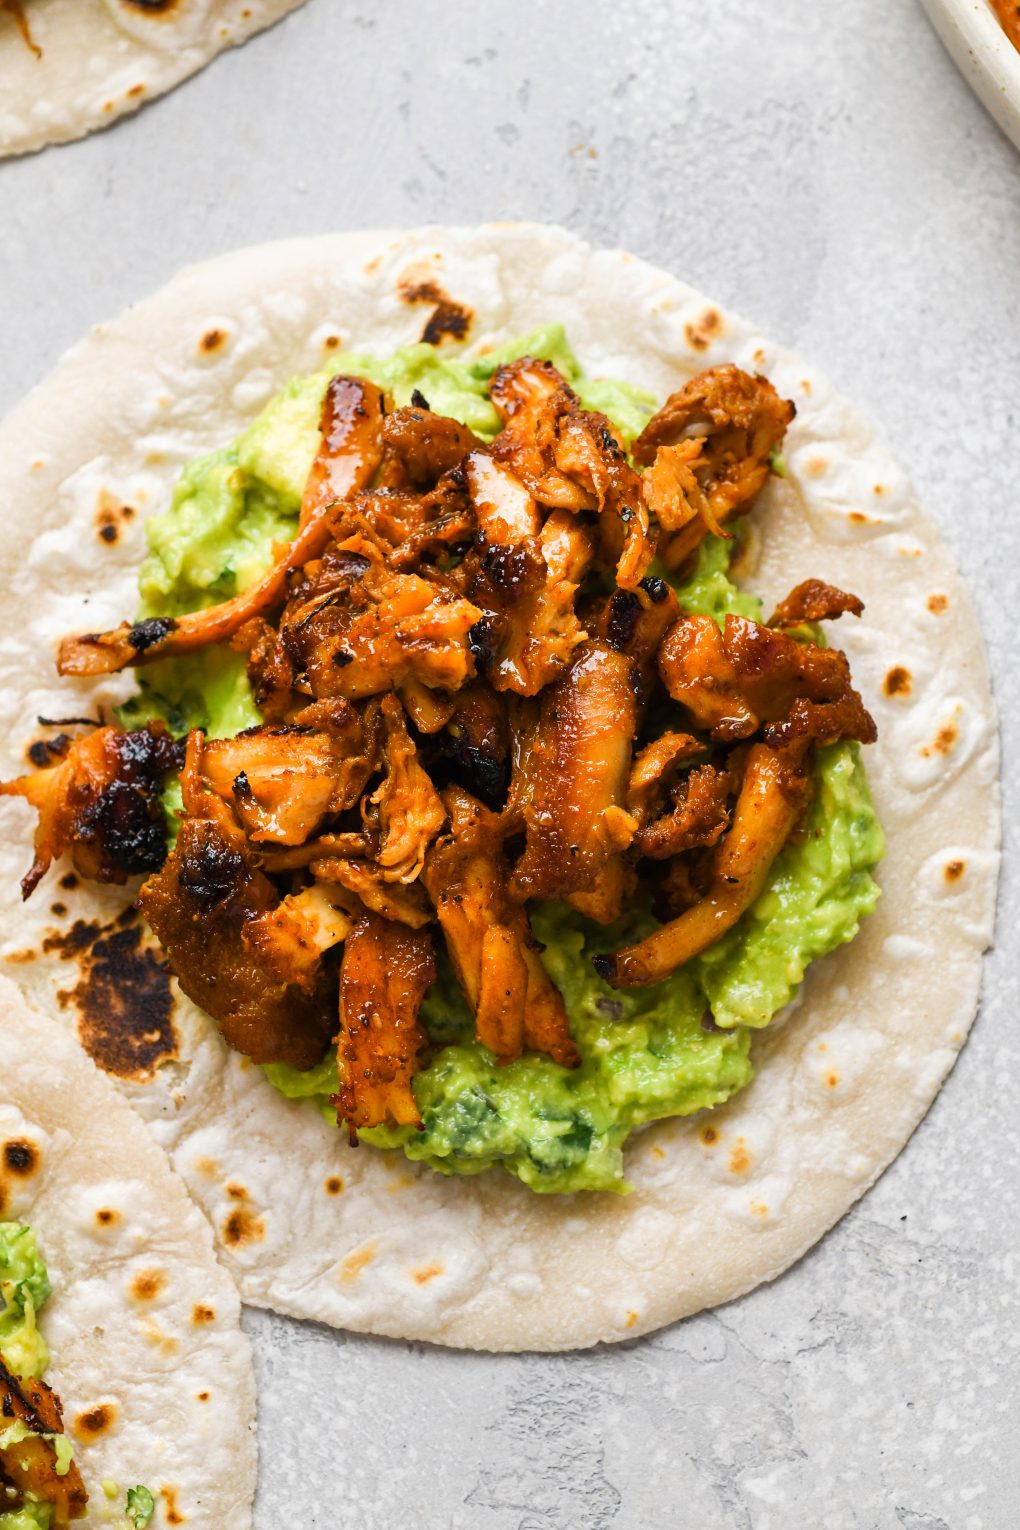 Close up image of a charred tortilla with guacamole and crispy seasoned shredded chicken.